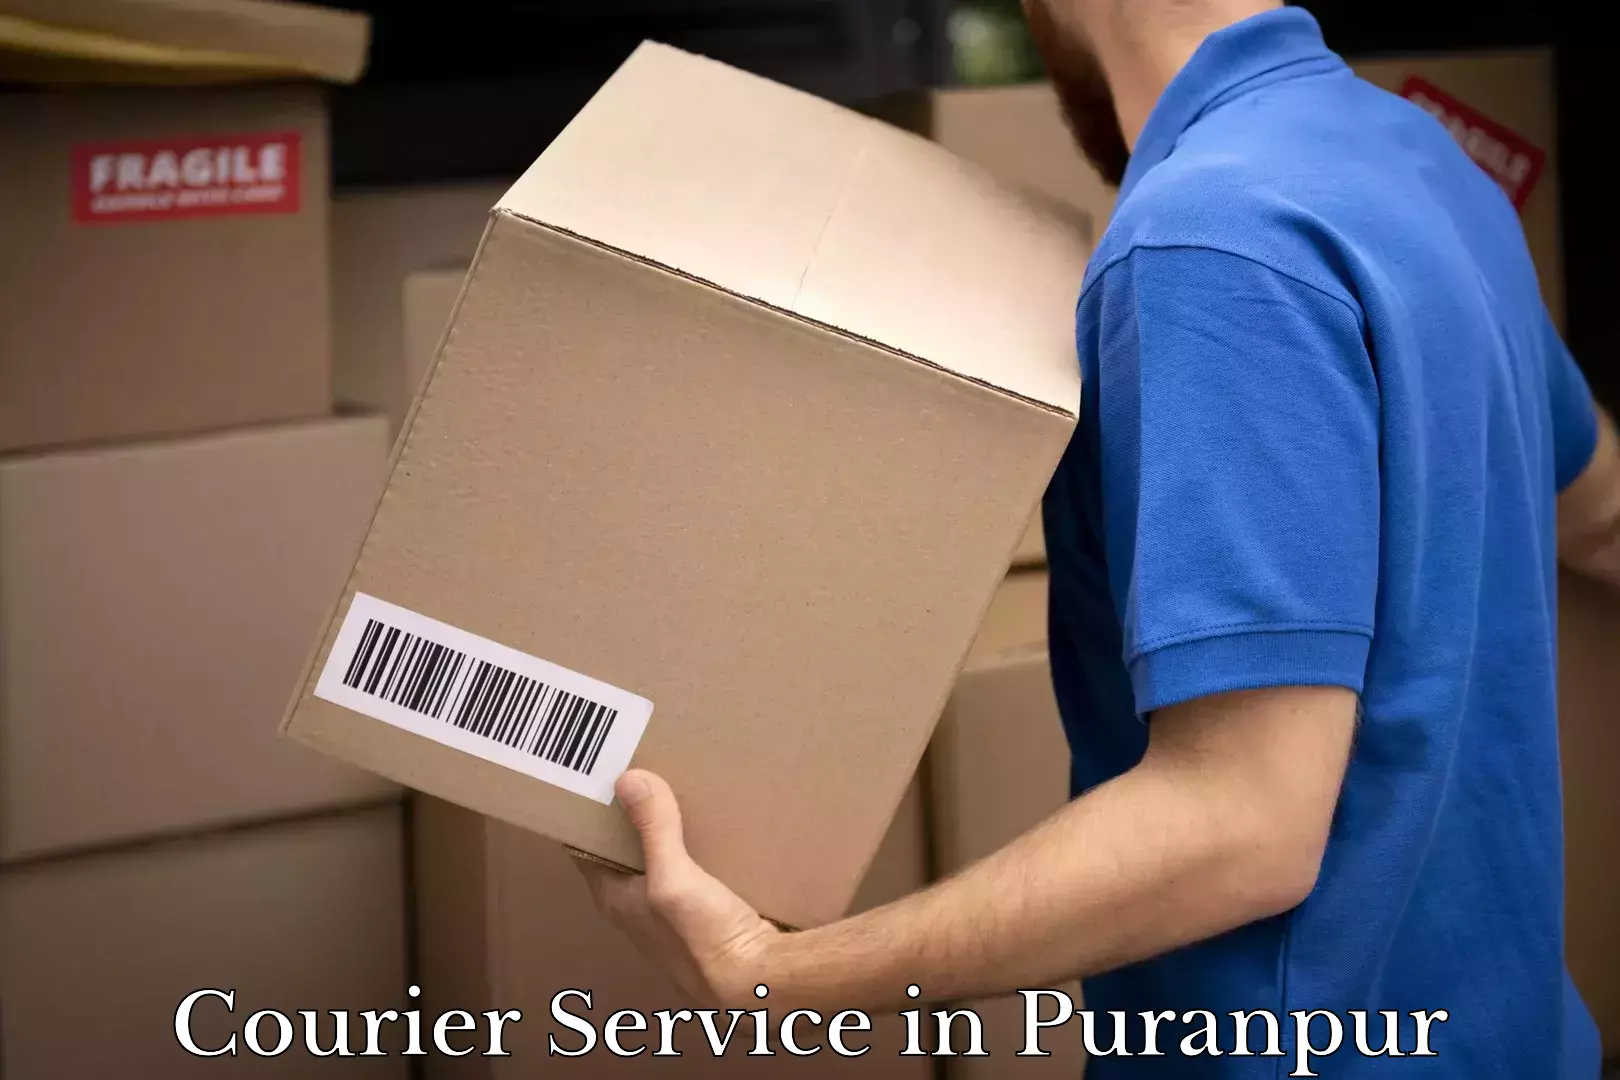 International shipping rates in Puranpur